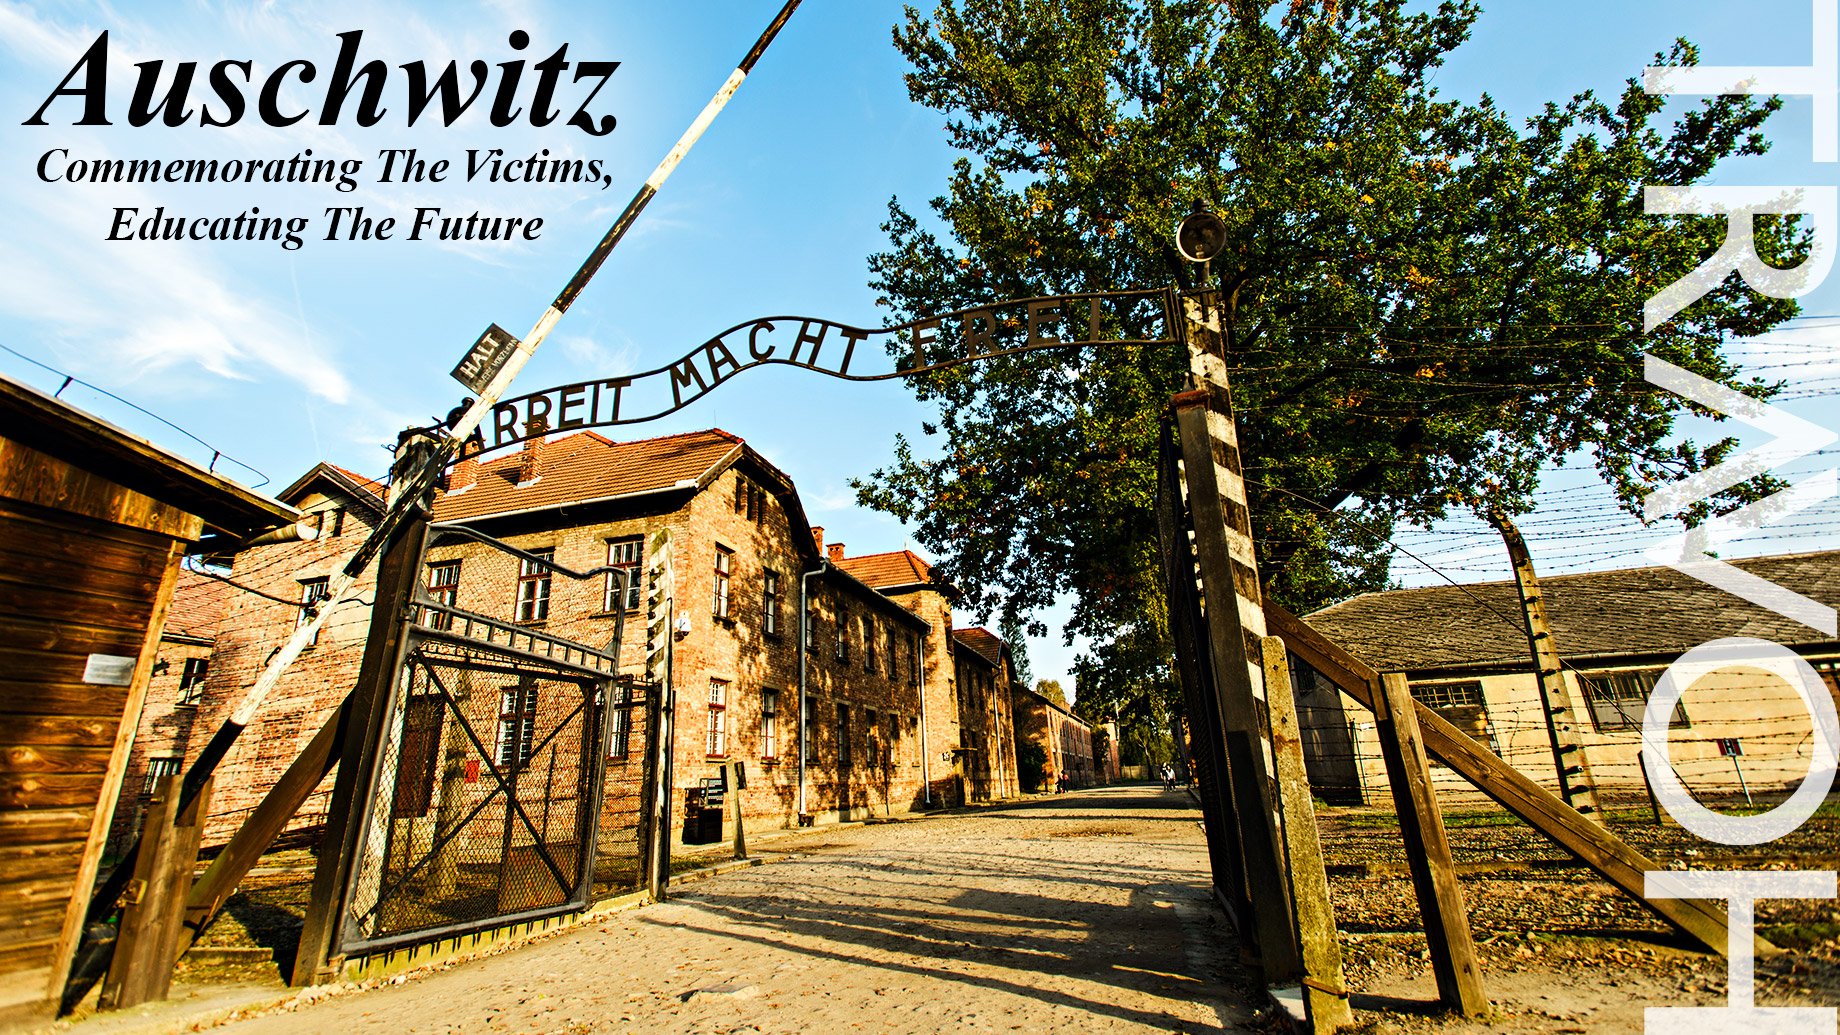 Auschwitz: Commemorating The Victims, Educating The Future